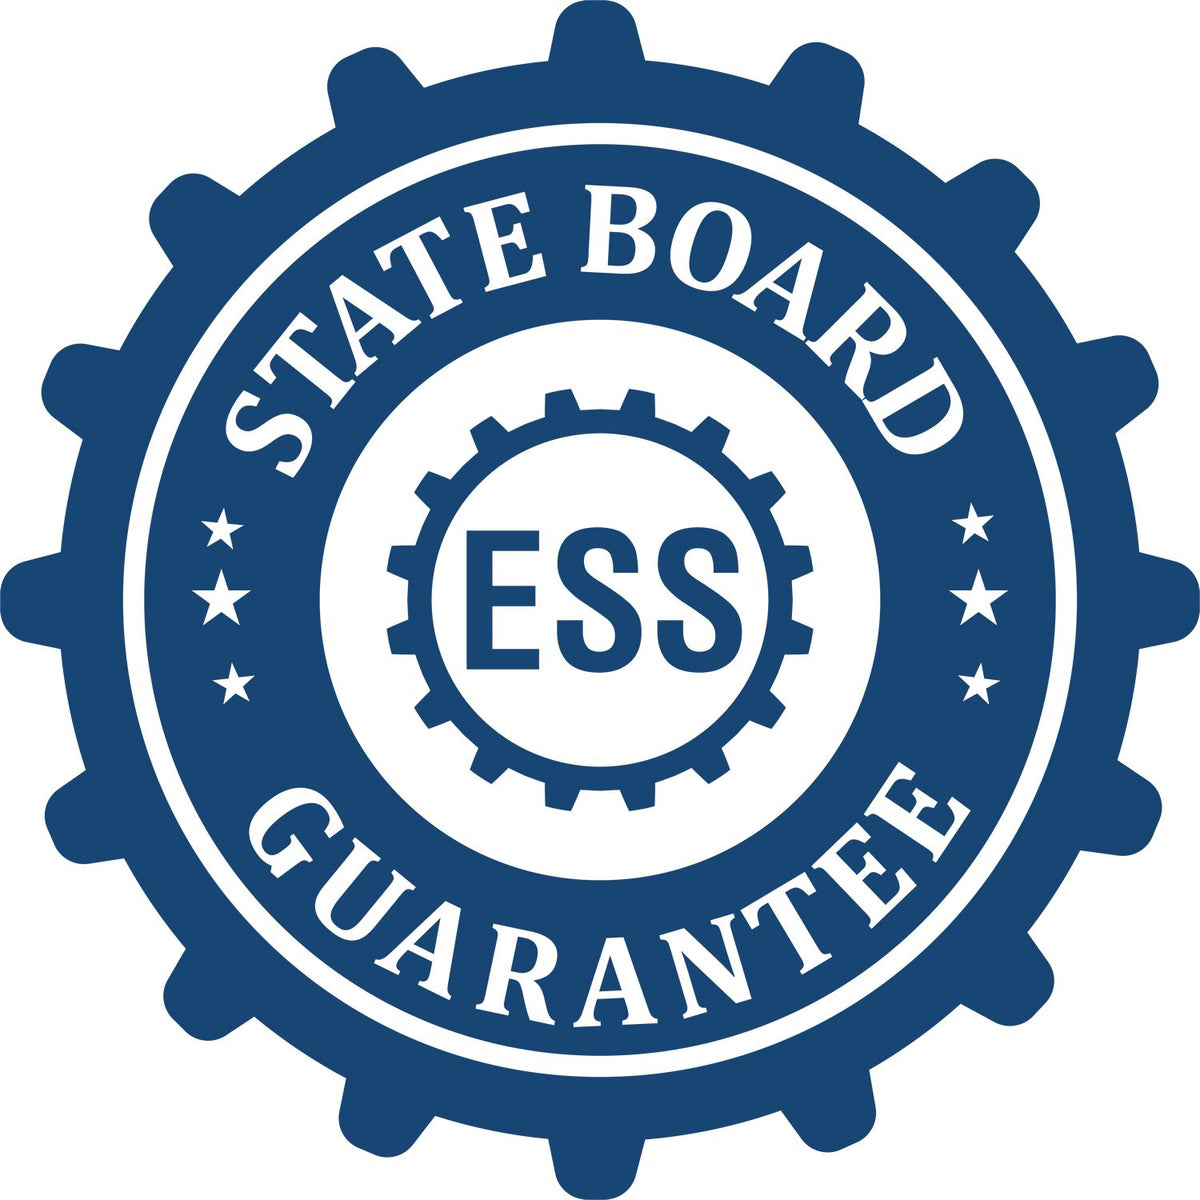 An emblem in a gear shape illustrating a state board guarantee for the Extended Long Reach Arizona Surveyor Embosser product.